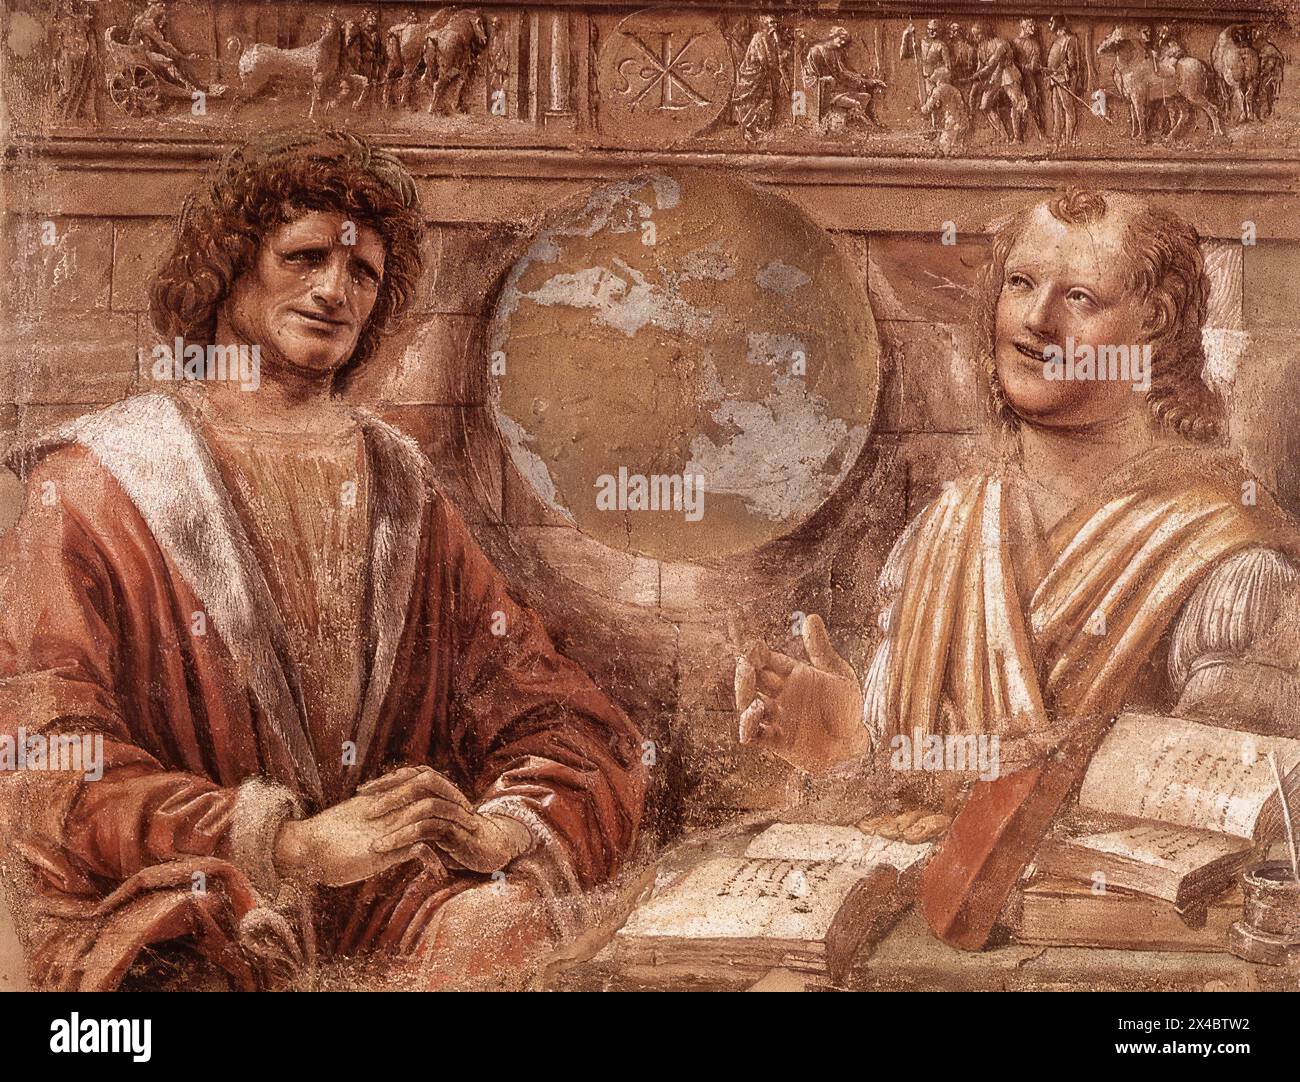 BRAMANTE (b. 1444, Fermignano, d. 1514, Roma)    Heraclitus and Democritus  1477  Fresco transferred to canvas  Pinacoteca di Brera, Milan    Democritus (c. 460 - c. 370 B.C.) and Heraclitus (c. 540 - c. 475 B.C.) are known as the 'laughing and crying philosophers.'    Democritus, a Greek philosopher, born at Abdera in Thrace, was known as the laughing philosopher because he found amusement in the folly of mankind. (The citizens of Abdera were proverbially stupid.) His philosophic system was contrasted with that of the earlier Heraclitus of Ephesus, who was known as the 'Dark' or 'Obscure' and Stock Photo